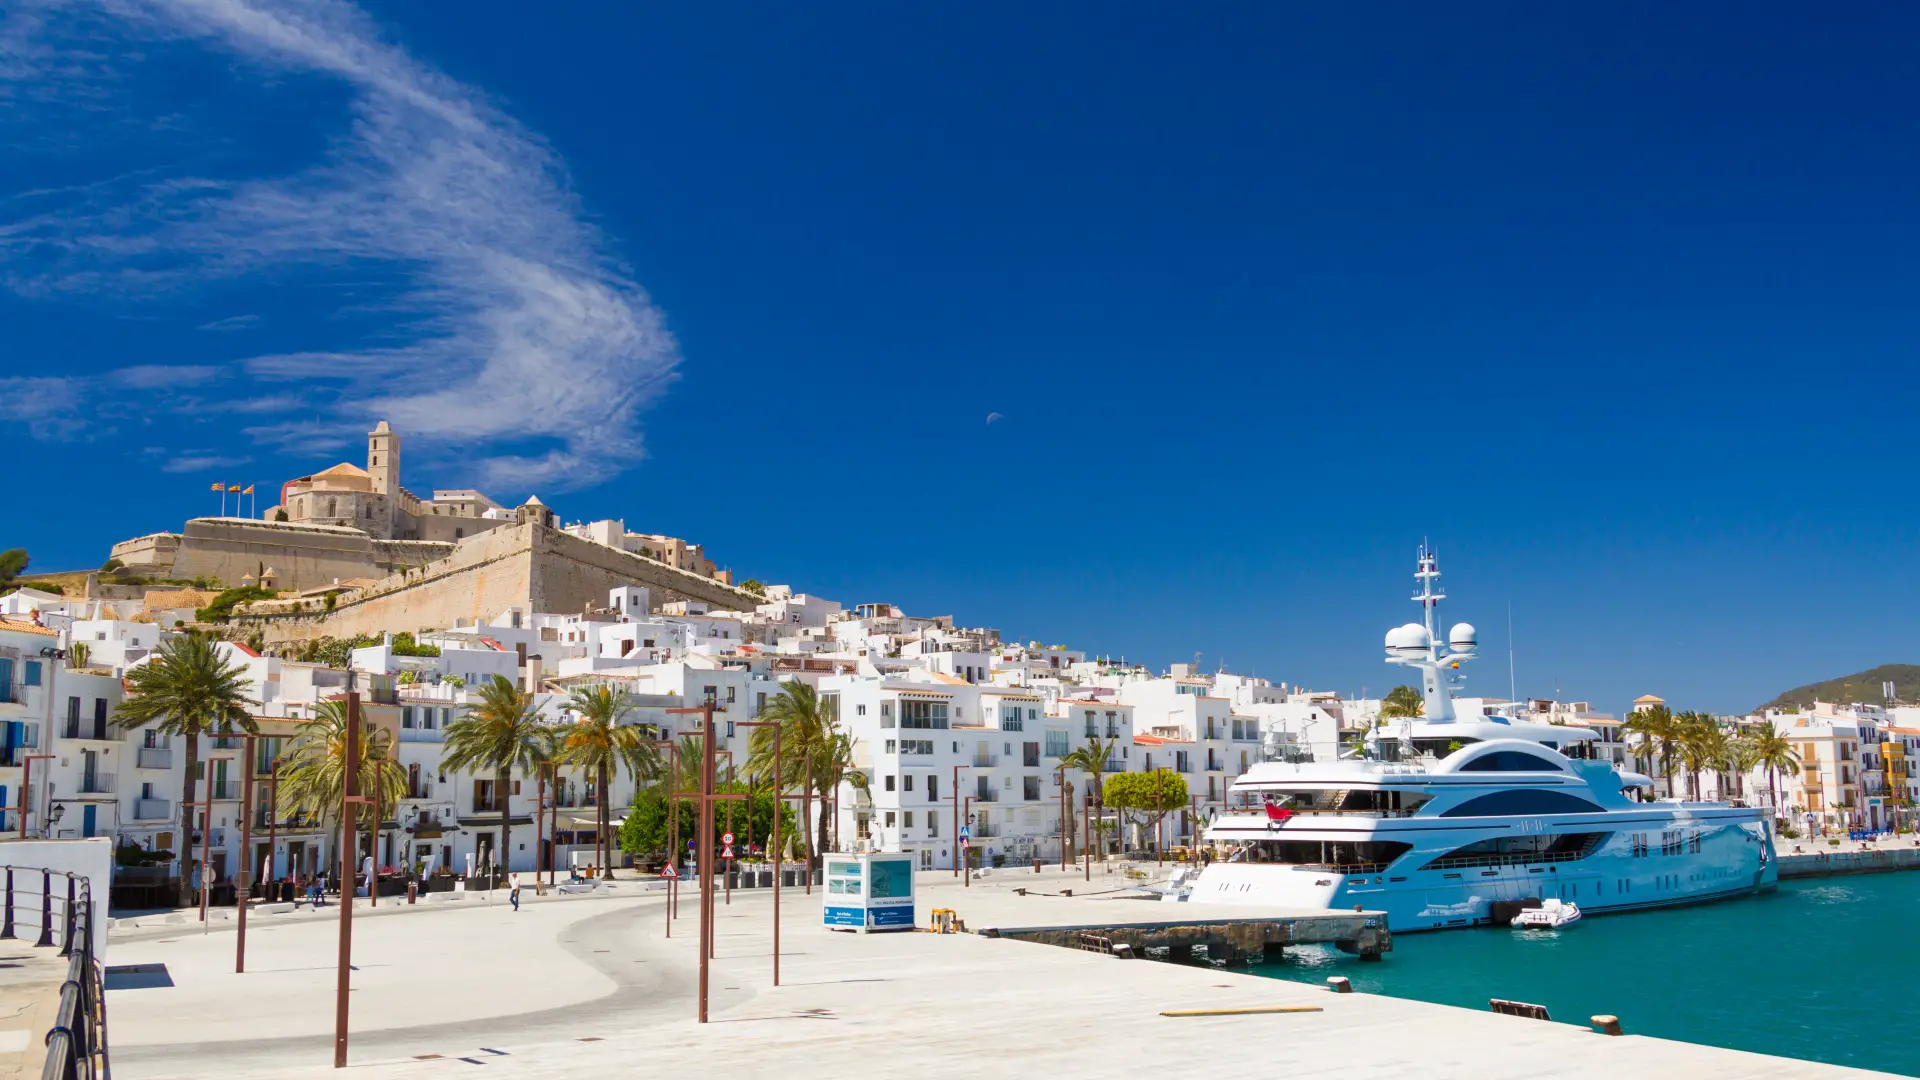 Ibiza a popular destination for footballers to go on holiday